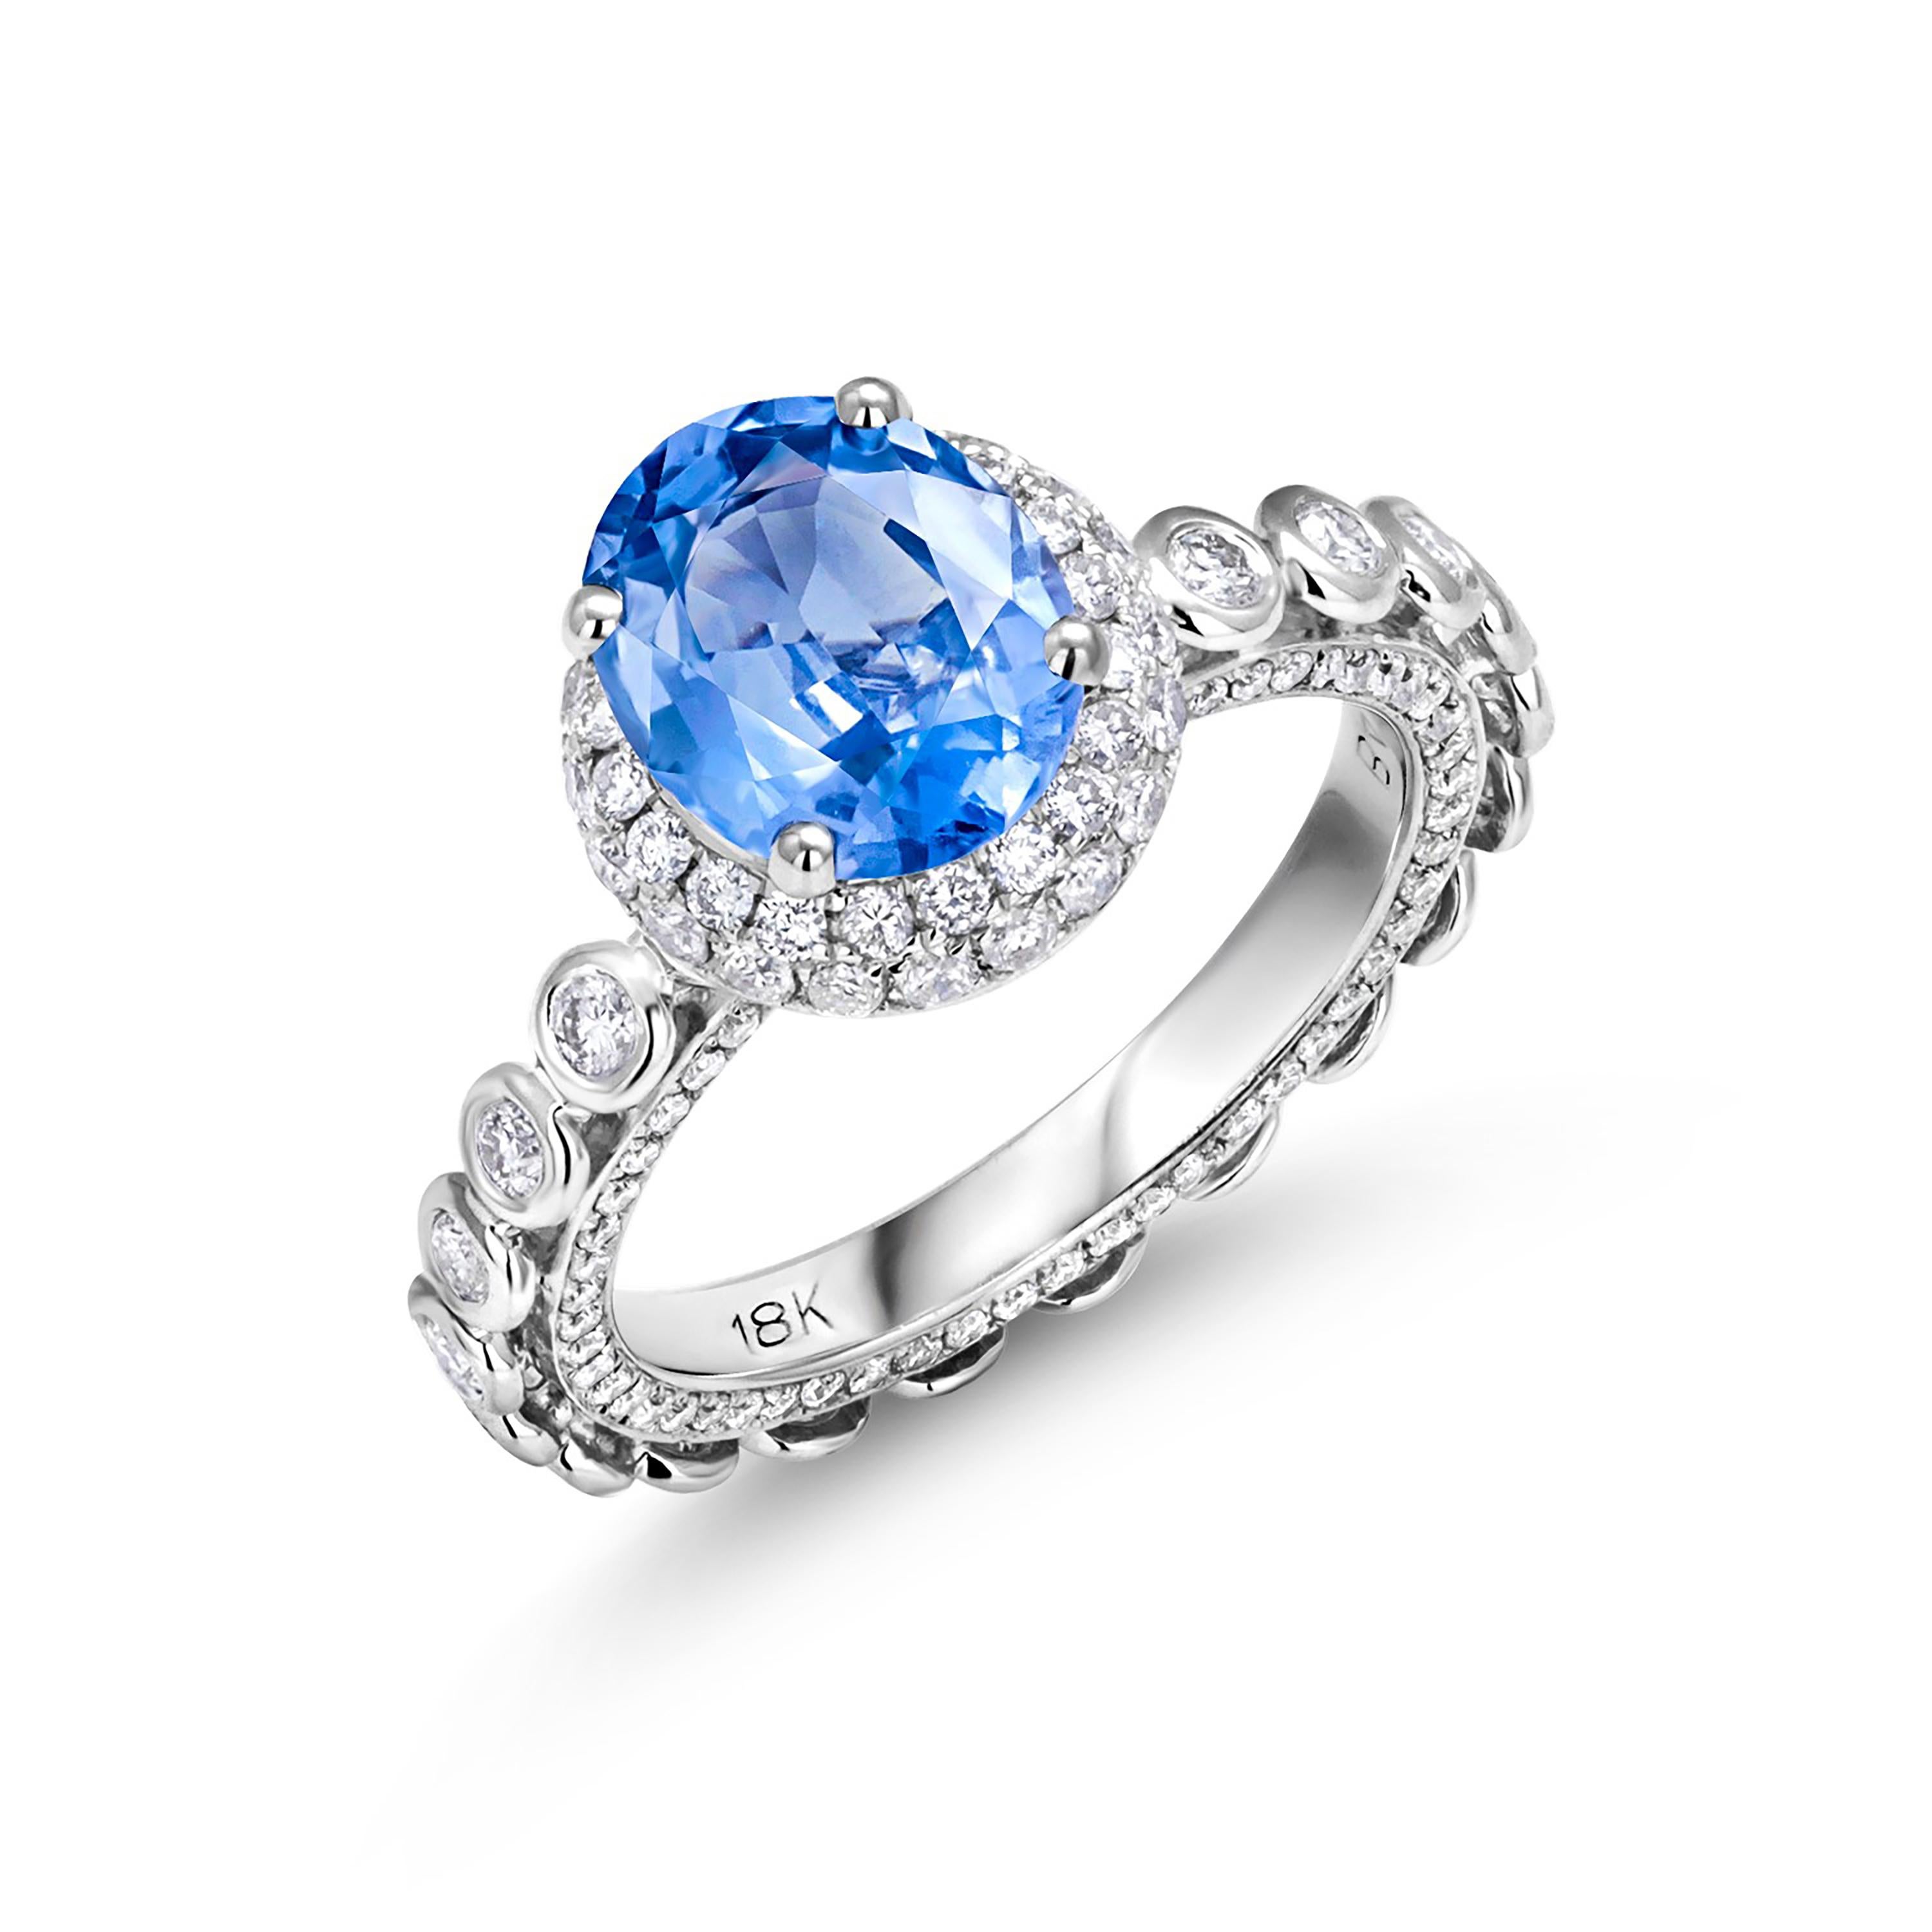 Ceylon Sapphire Diamonds 4.31 Carat Eighteen Karat Gold Cocktail Ring Size 6 In New Condition For Sale In New York, NY